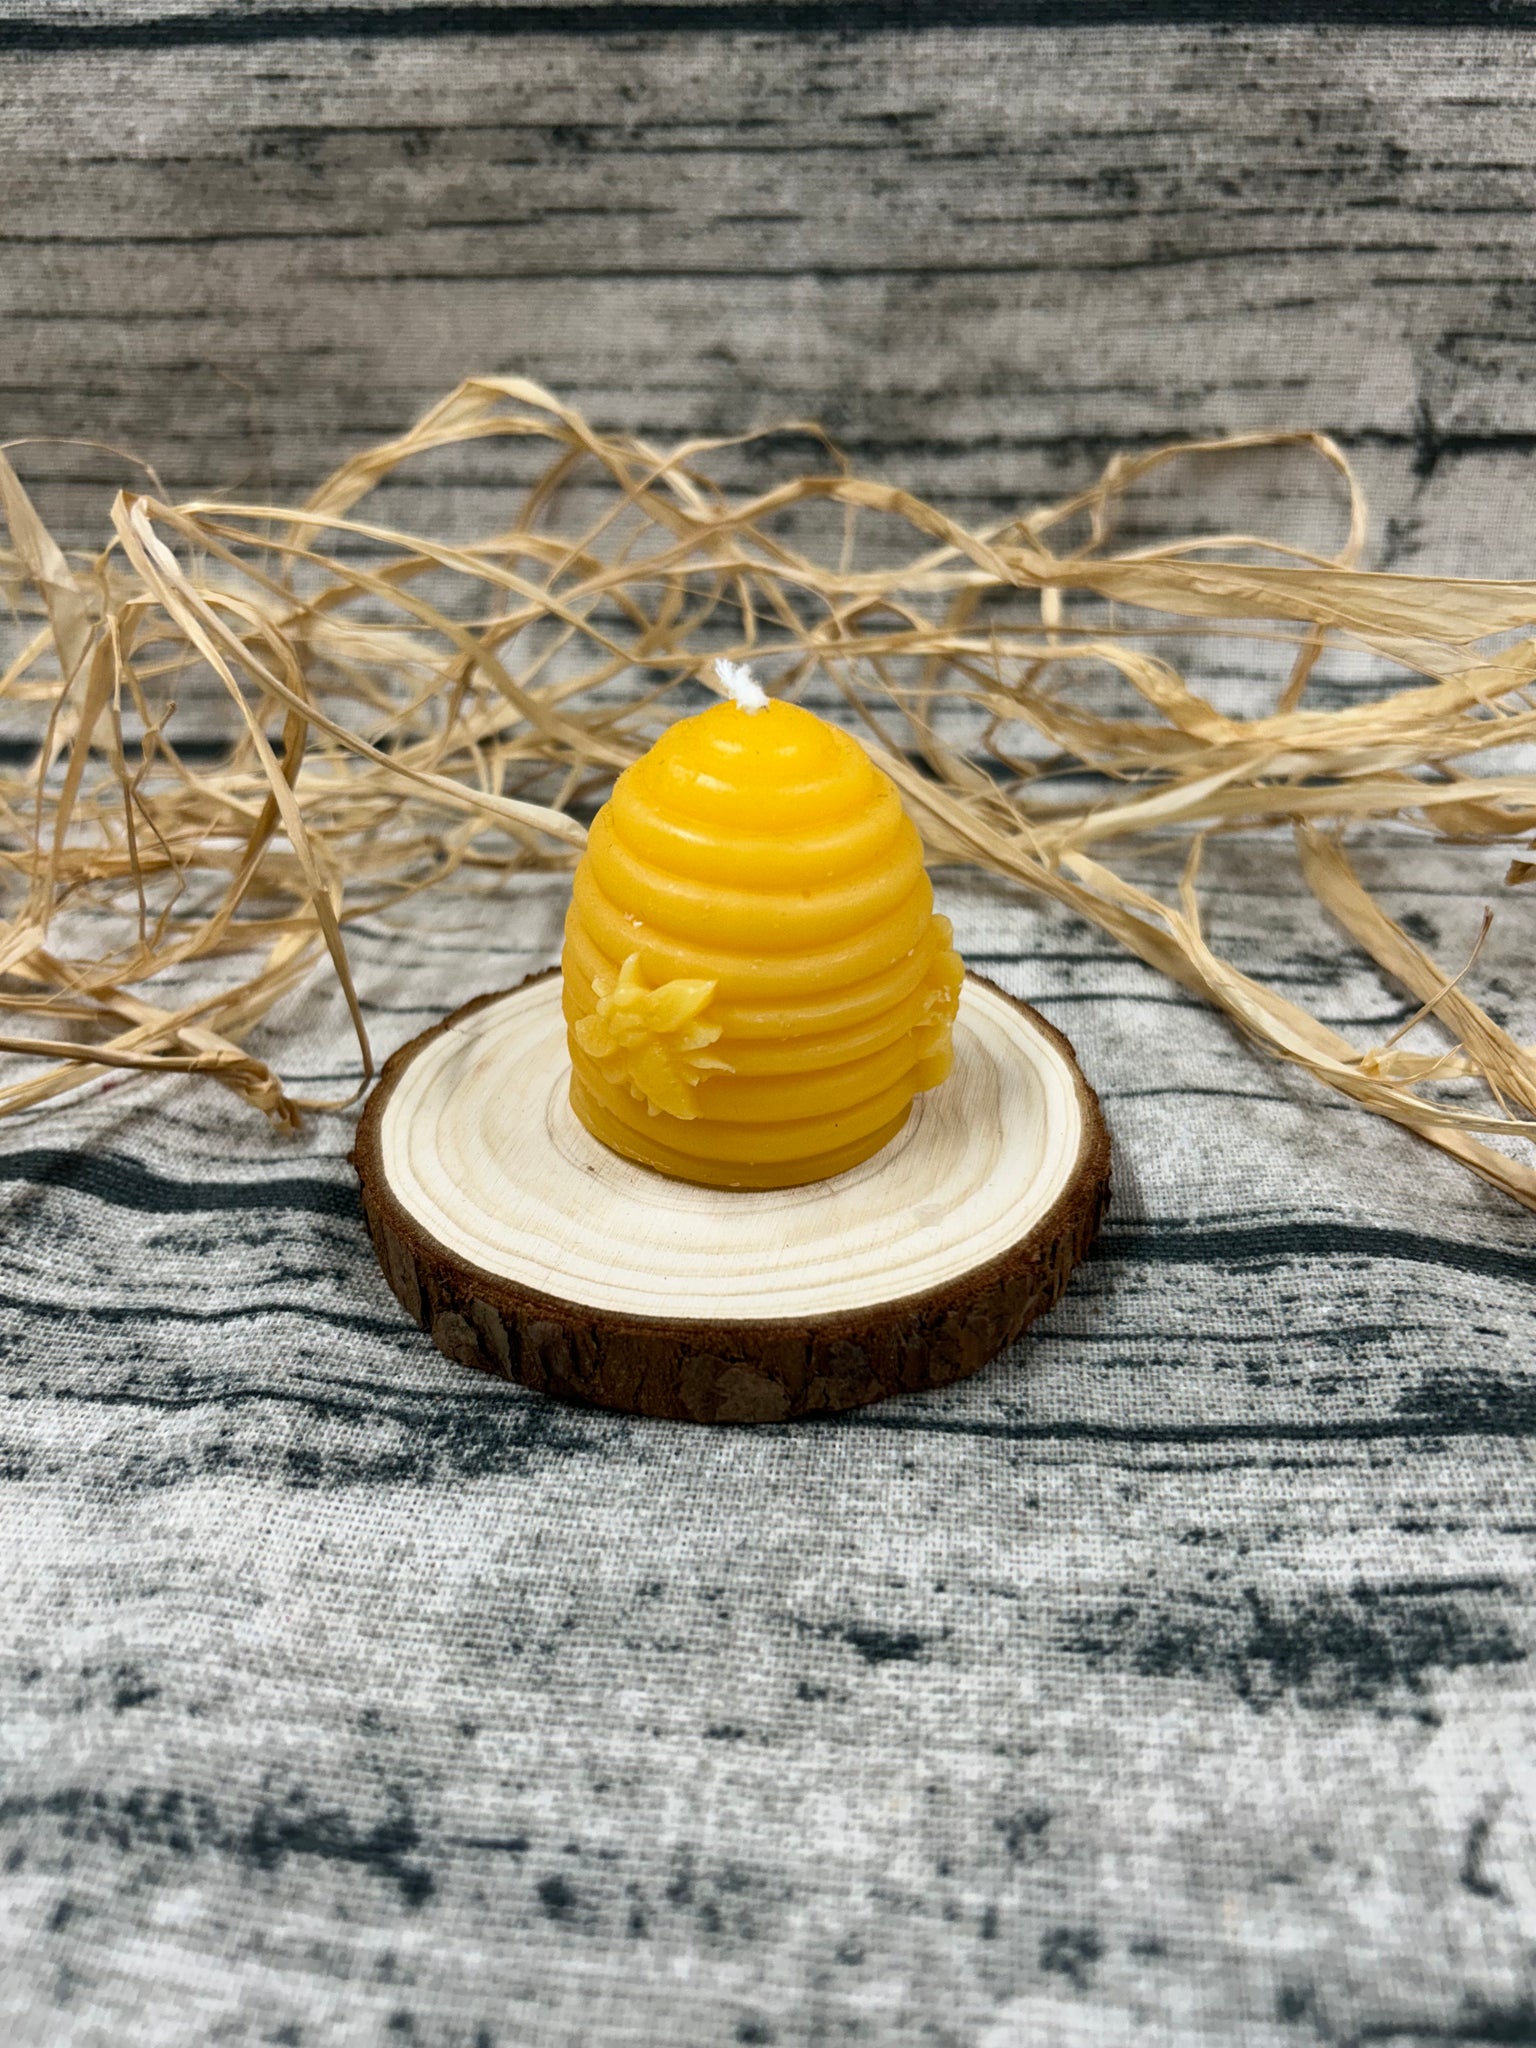 Small Hive Beeswax Candles